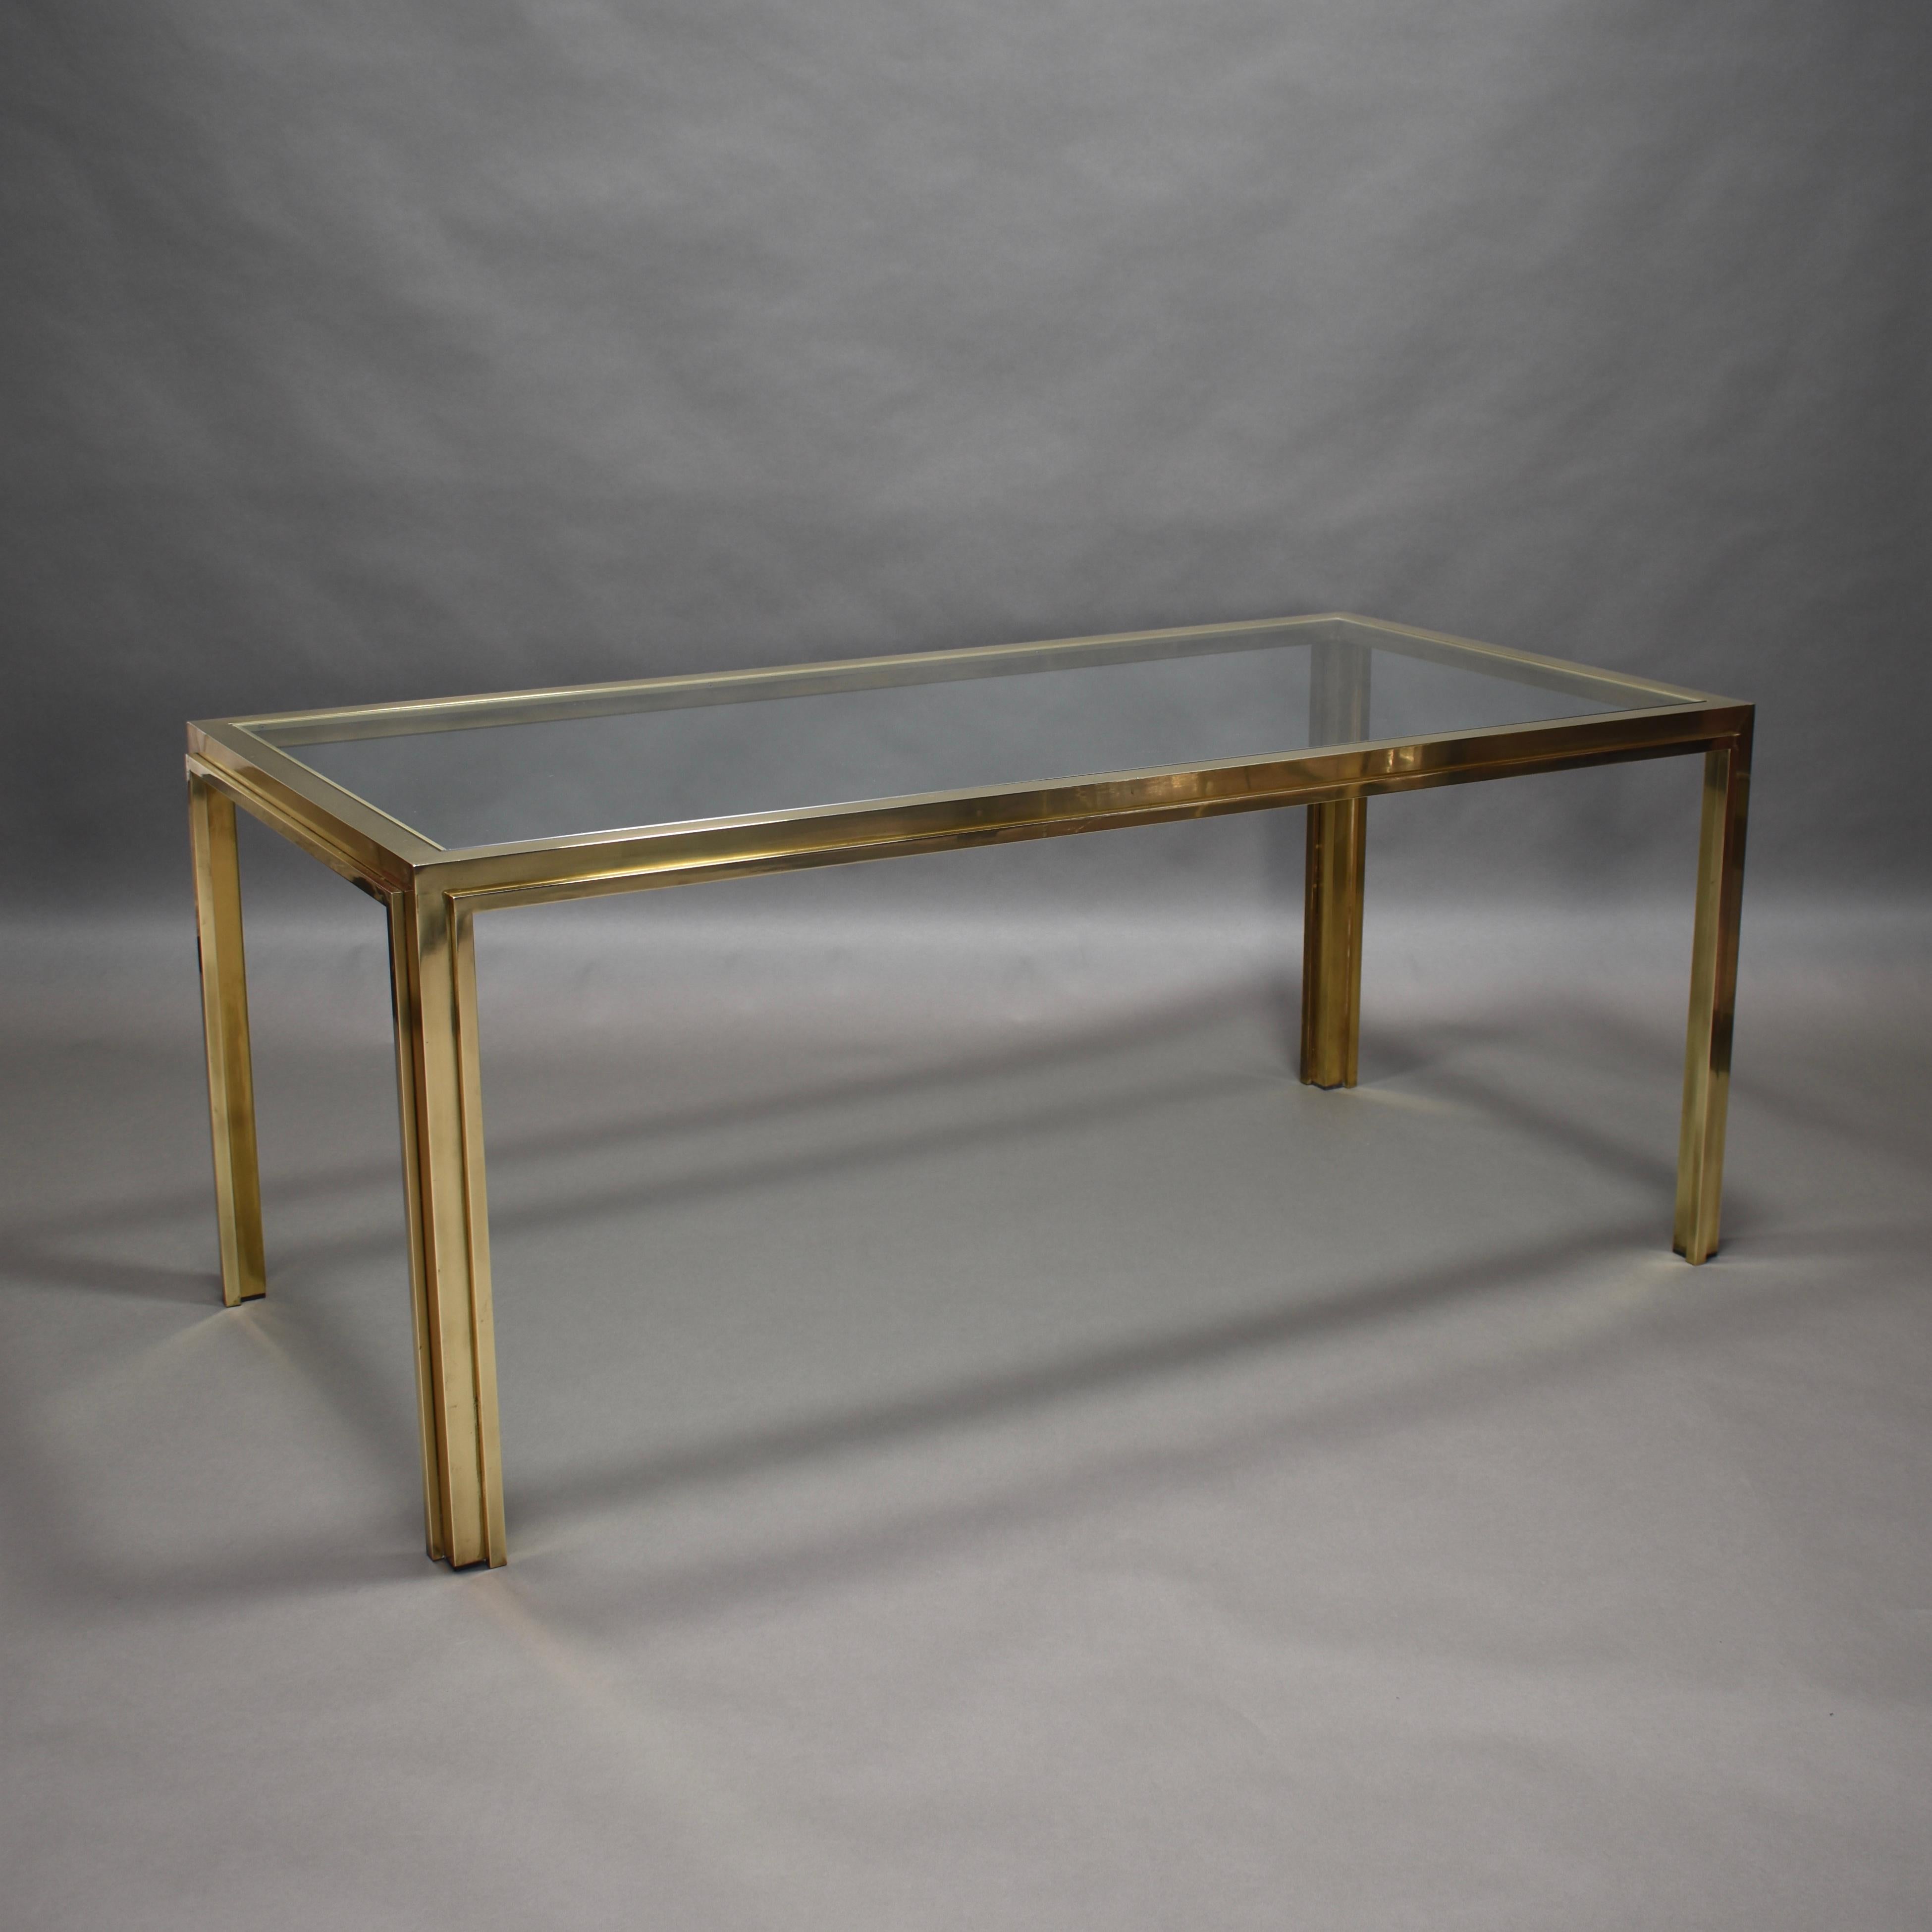 Late 20th Century Exclusive Italian Dining Table in Brass by or in the style of Rizzo, Italy 1970s